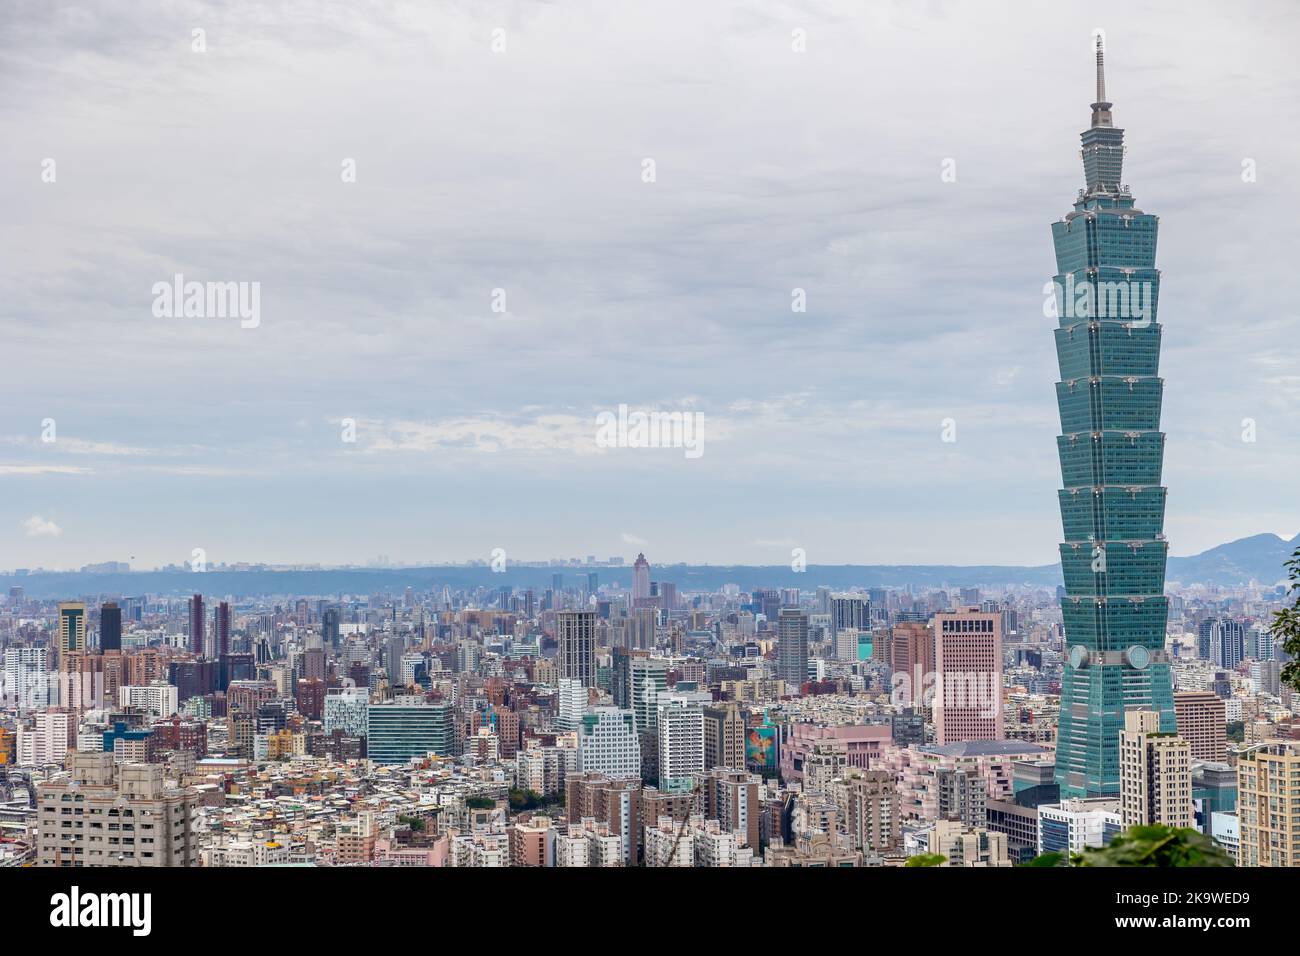 Taipei skyline viewed from Elephant Mountain to the south of the city. Stock Photo